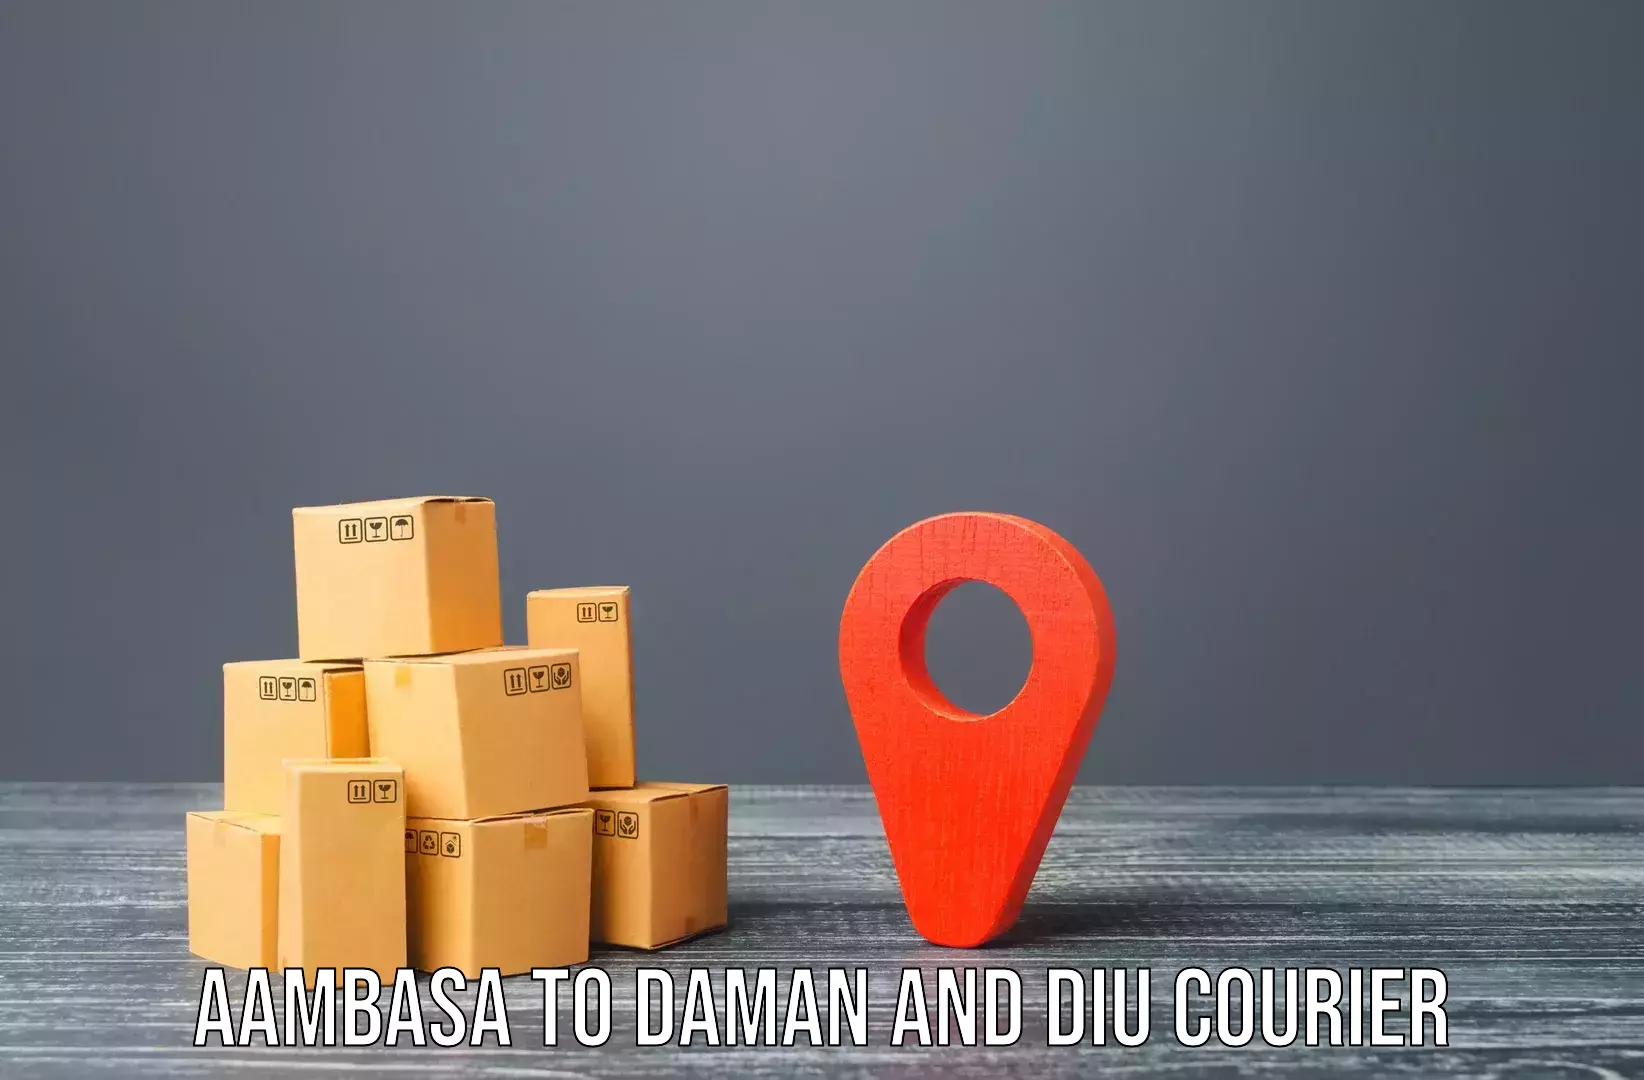 Quality moving services Aambasa to Daman